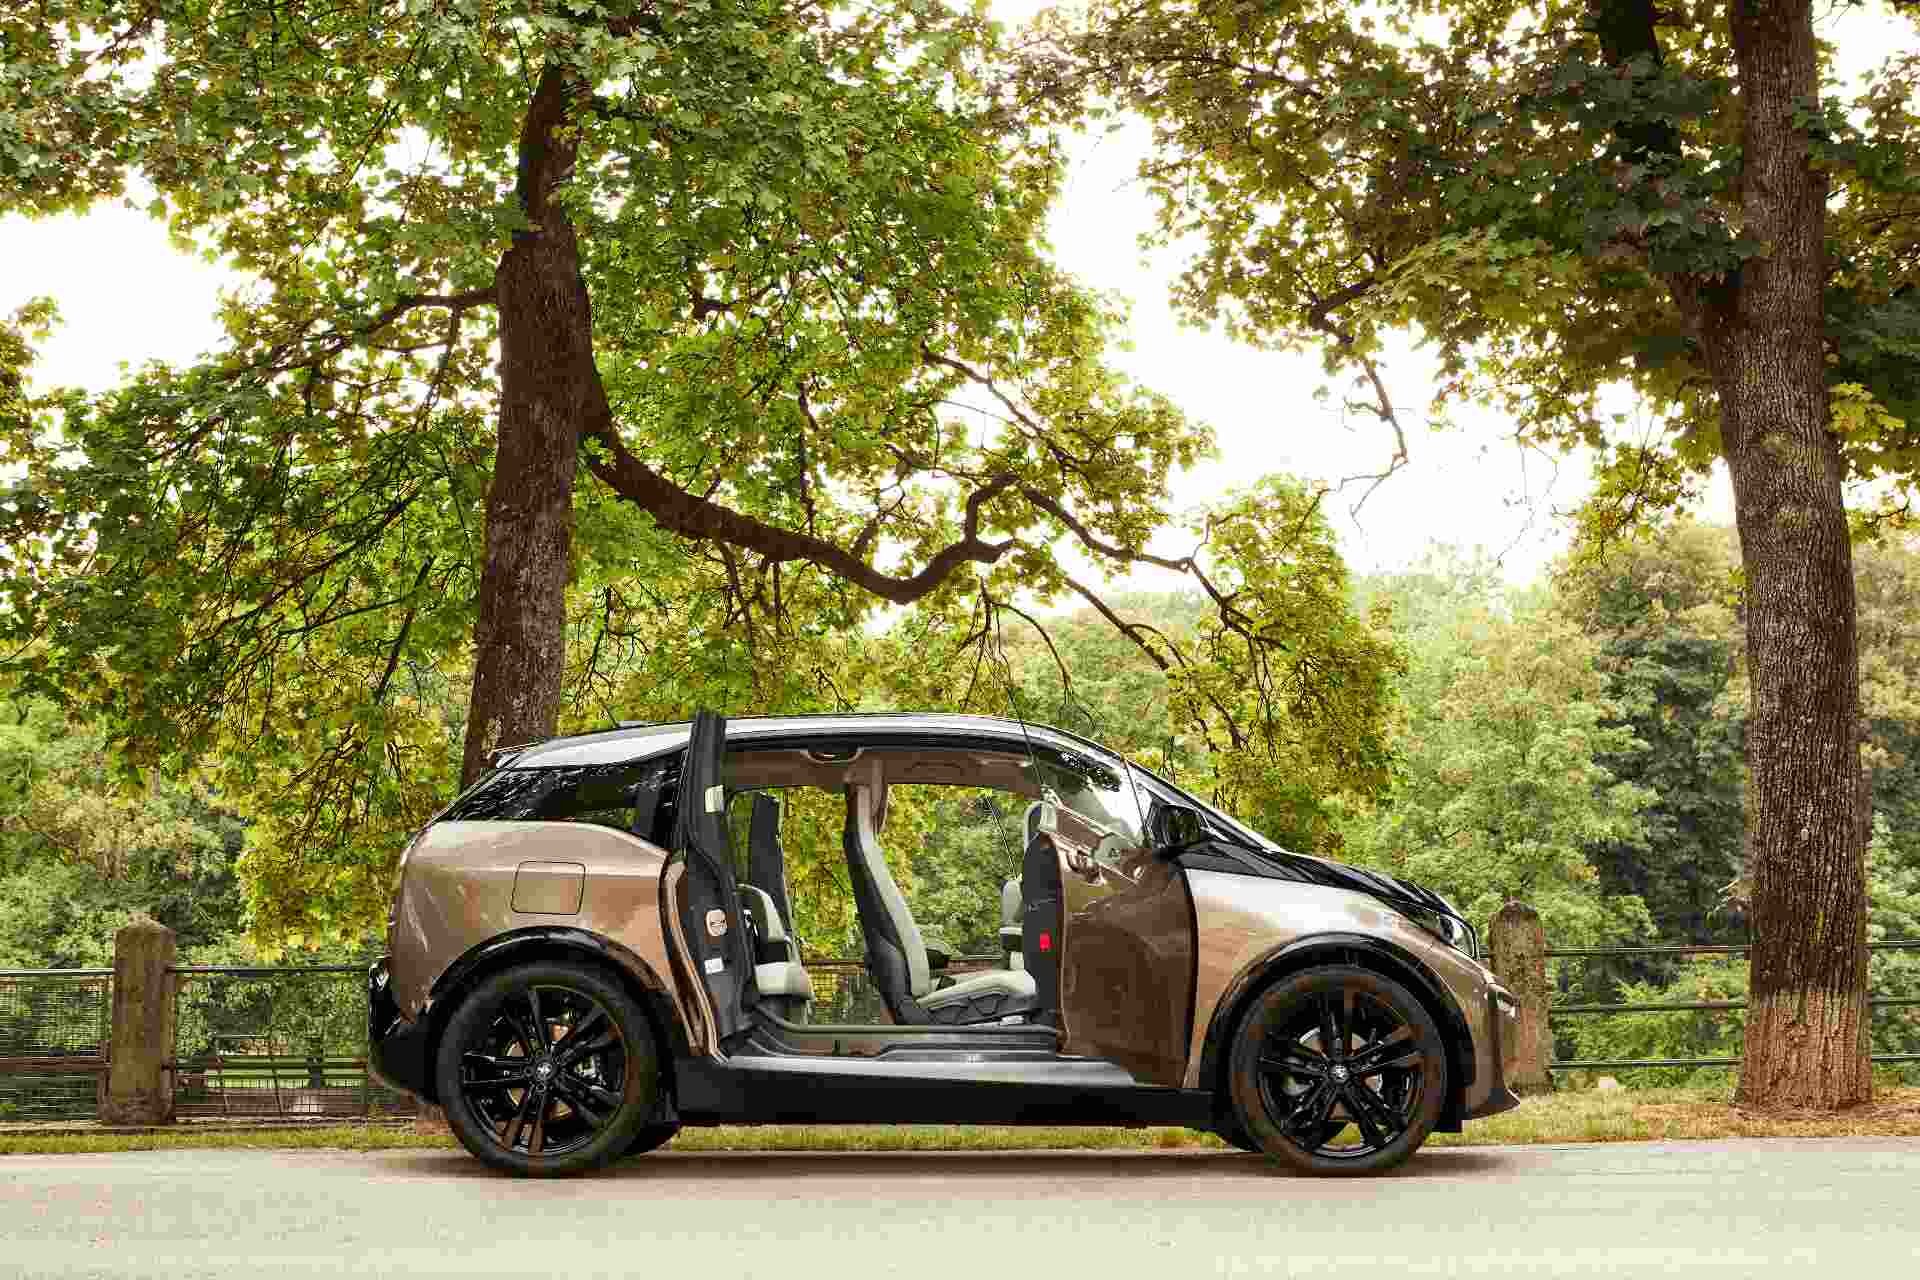 BMW’s i3 features wide opening access to the interior thanks to the front and rear-hinged doors